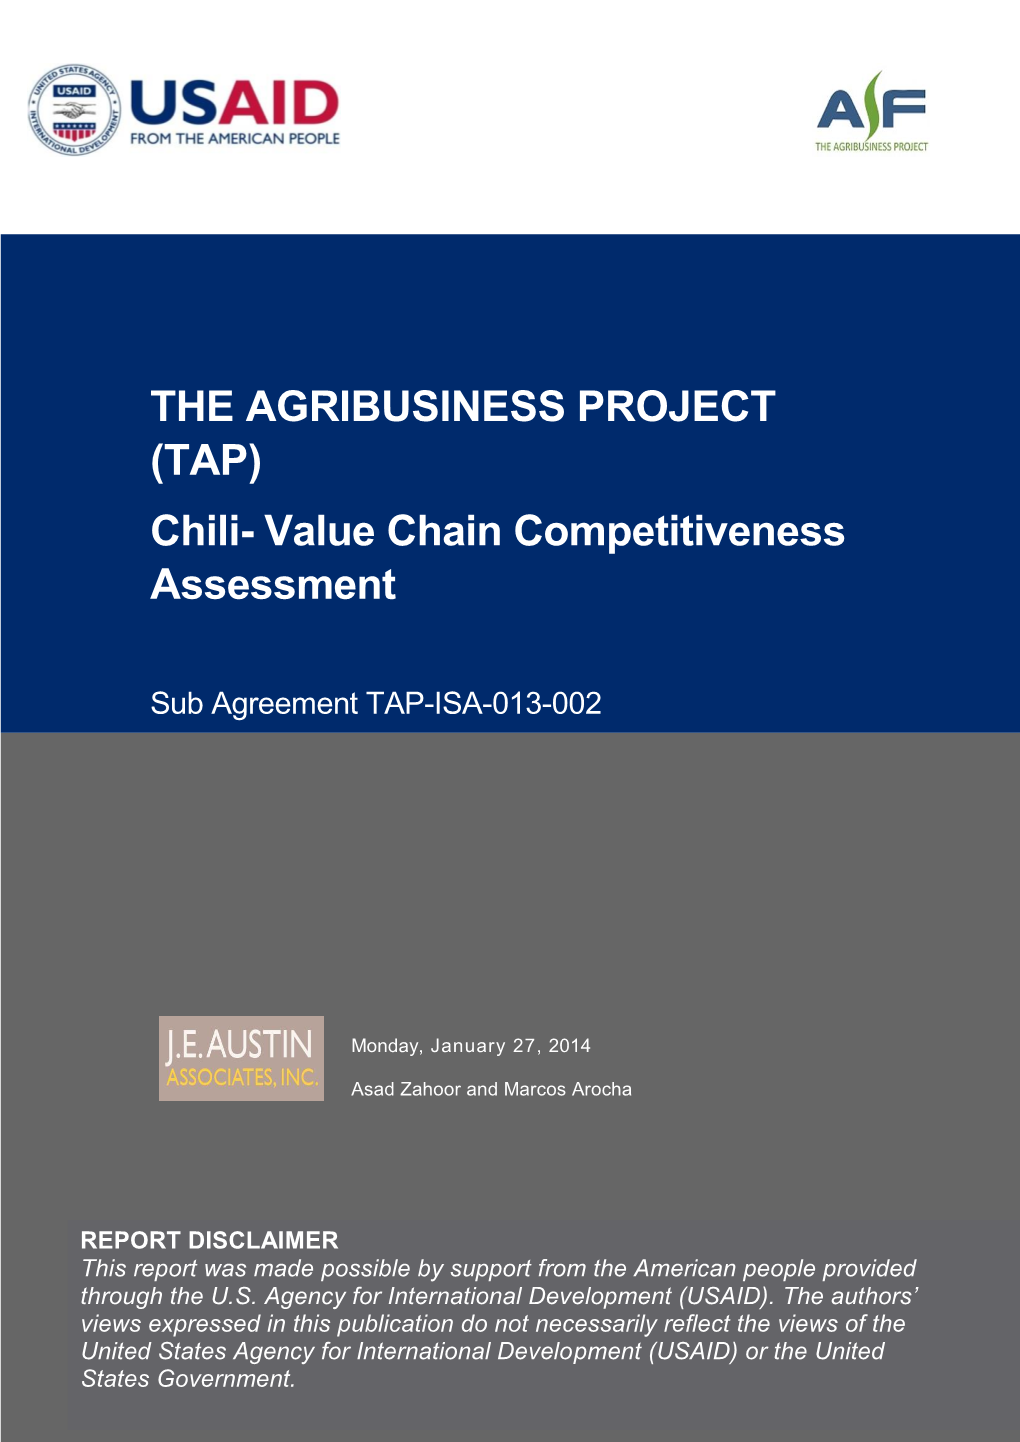 (TAP) Chili- Value Chain Competitiveness Assessment